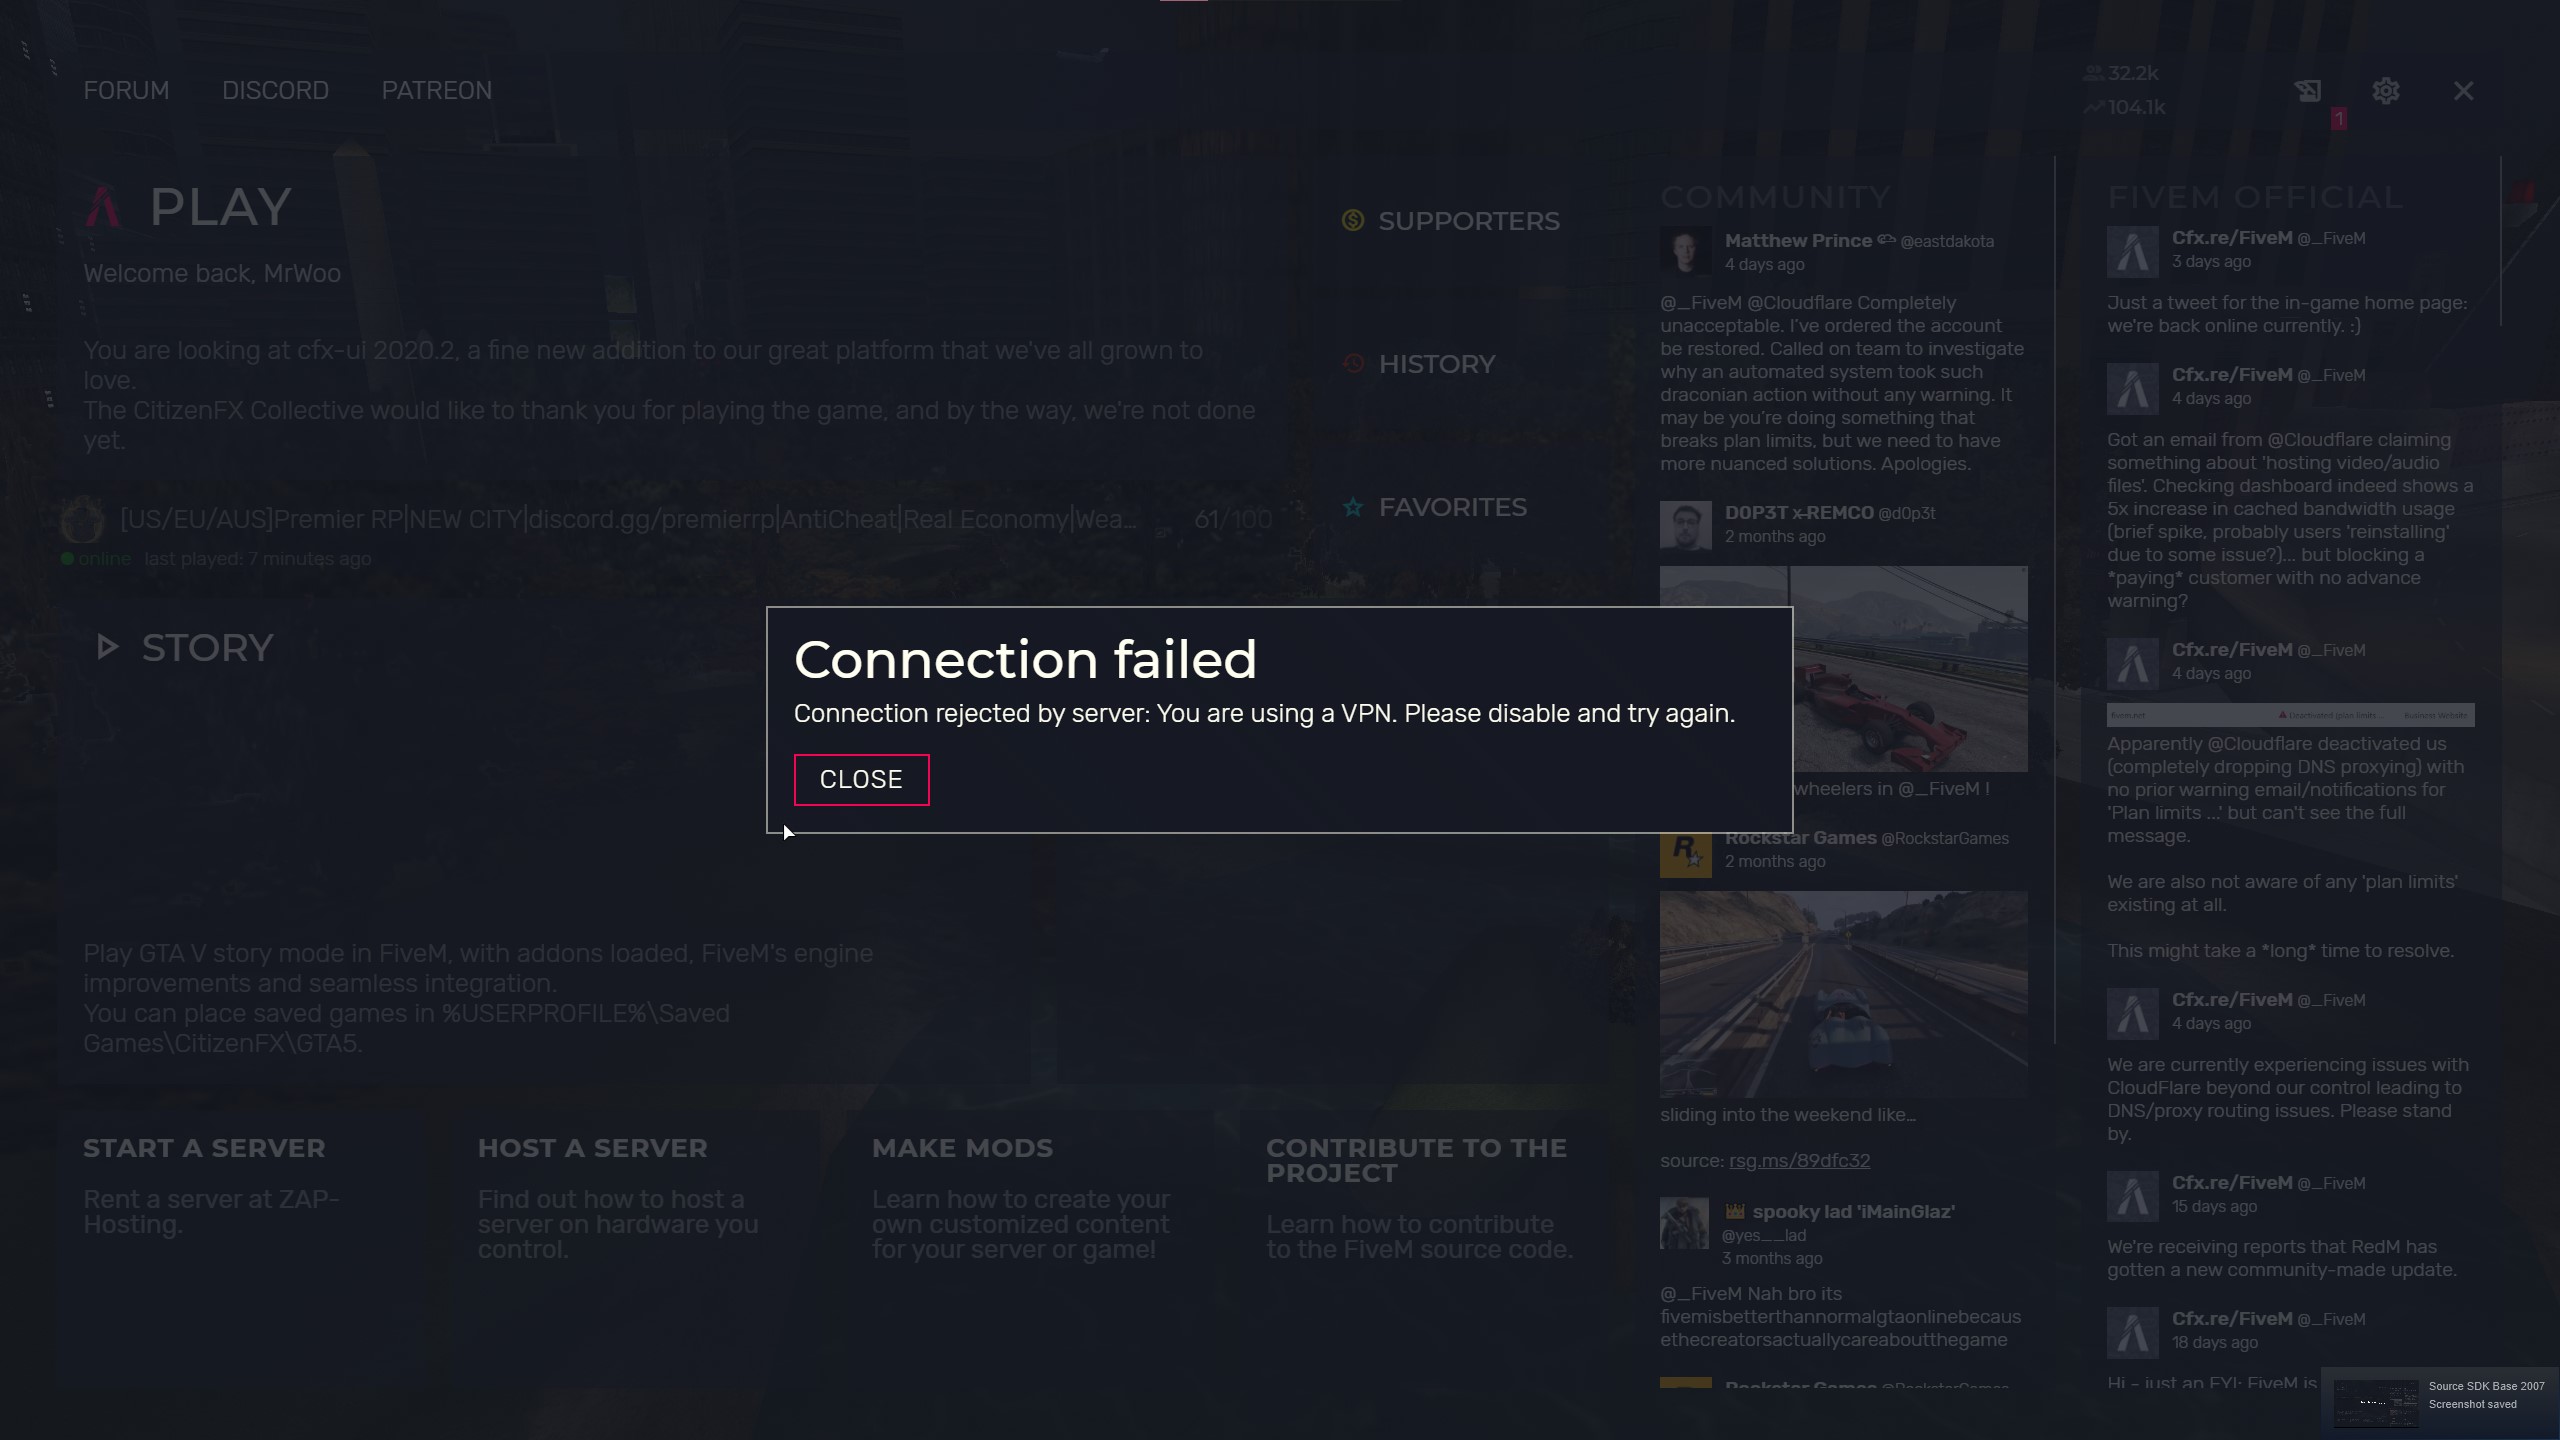 Timeout error code. Connection rejected unacceptable nickname Arizona Rp.